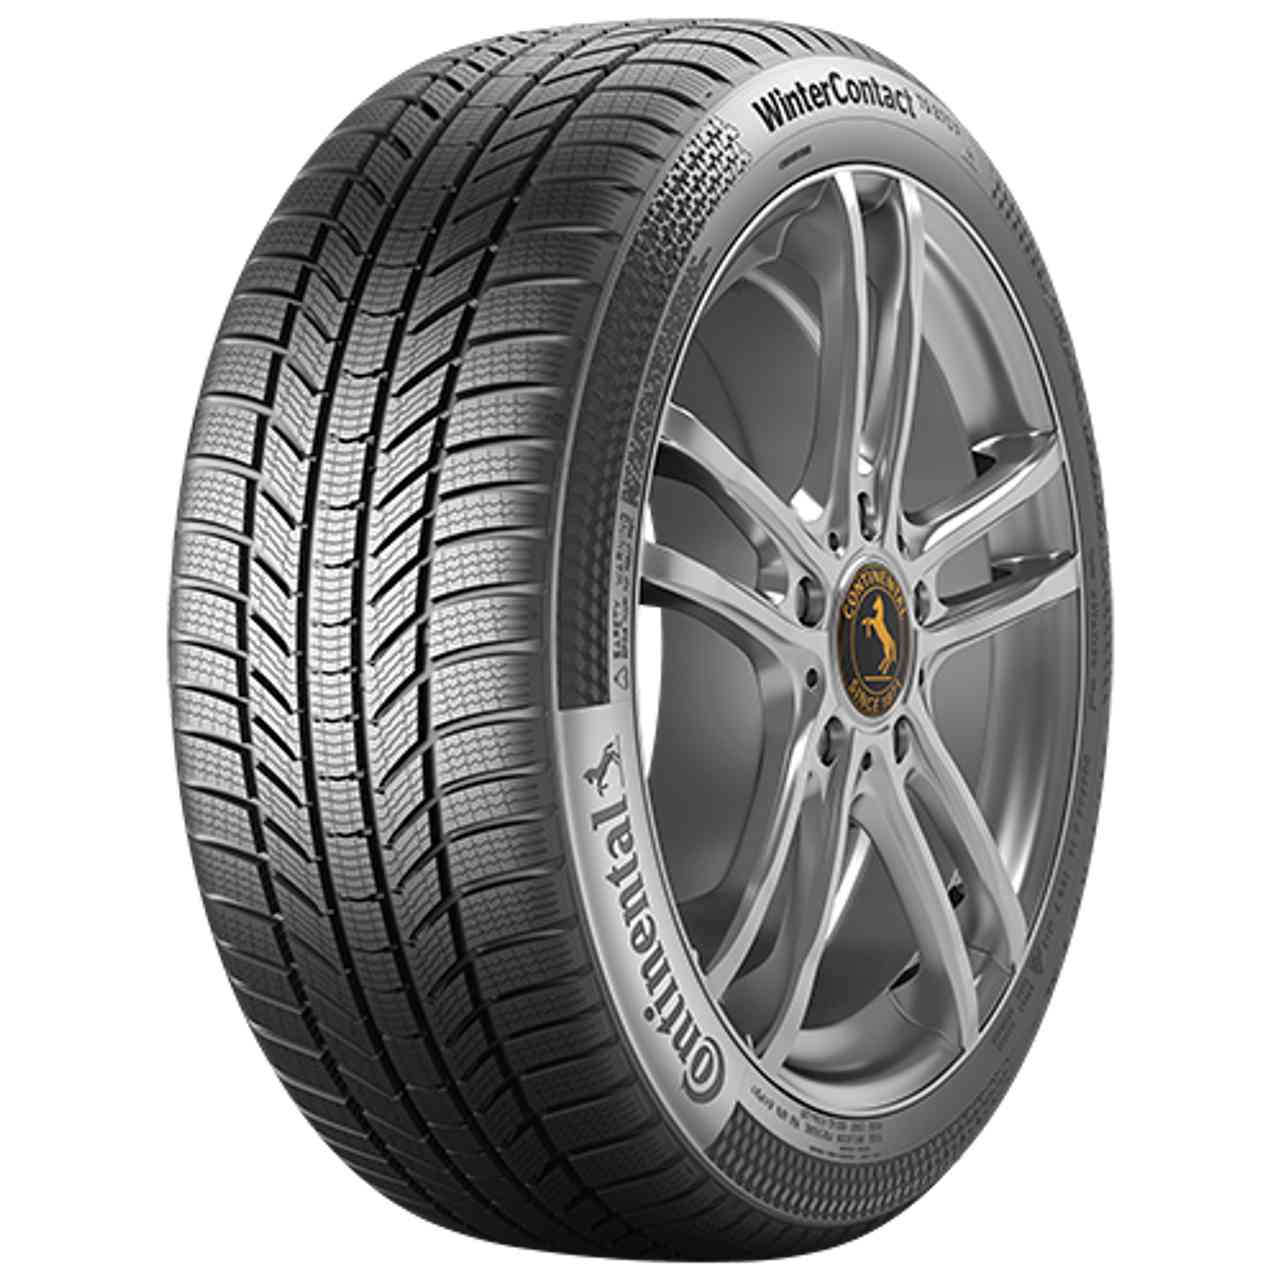 CONTINENTAL WINTERCONTACT TS 870 P (EVc) 215/55R17 98V BSW XL